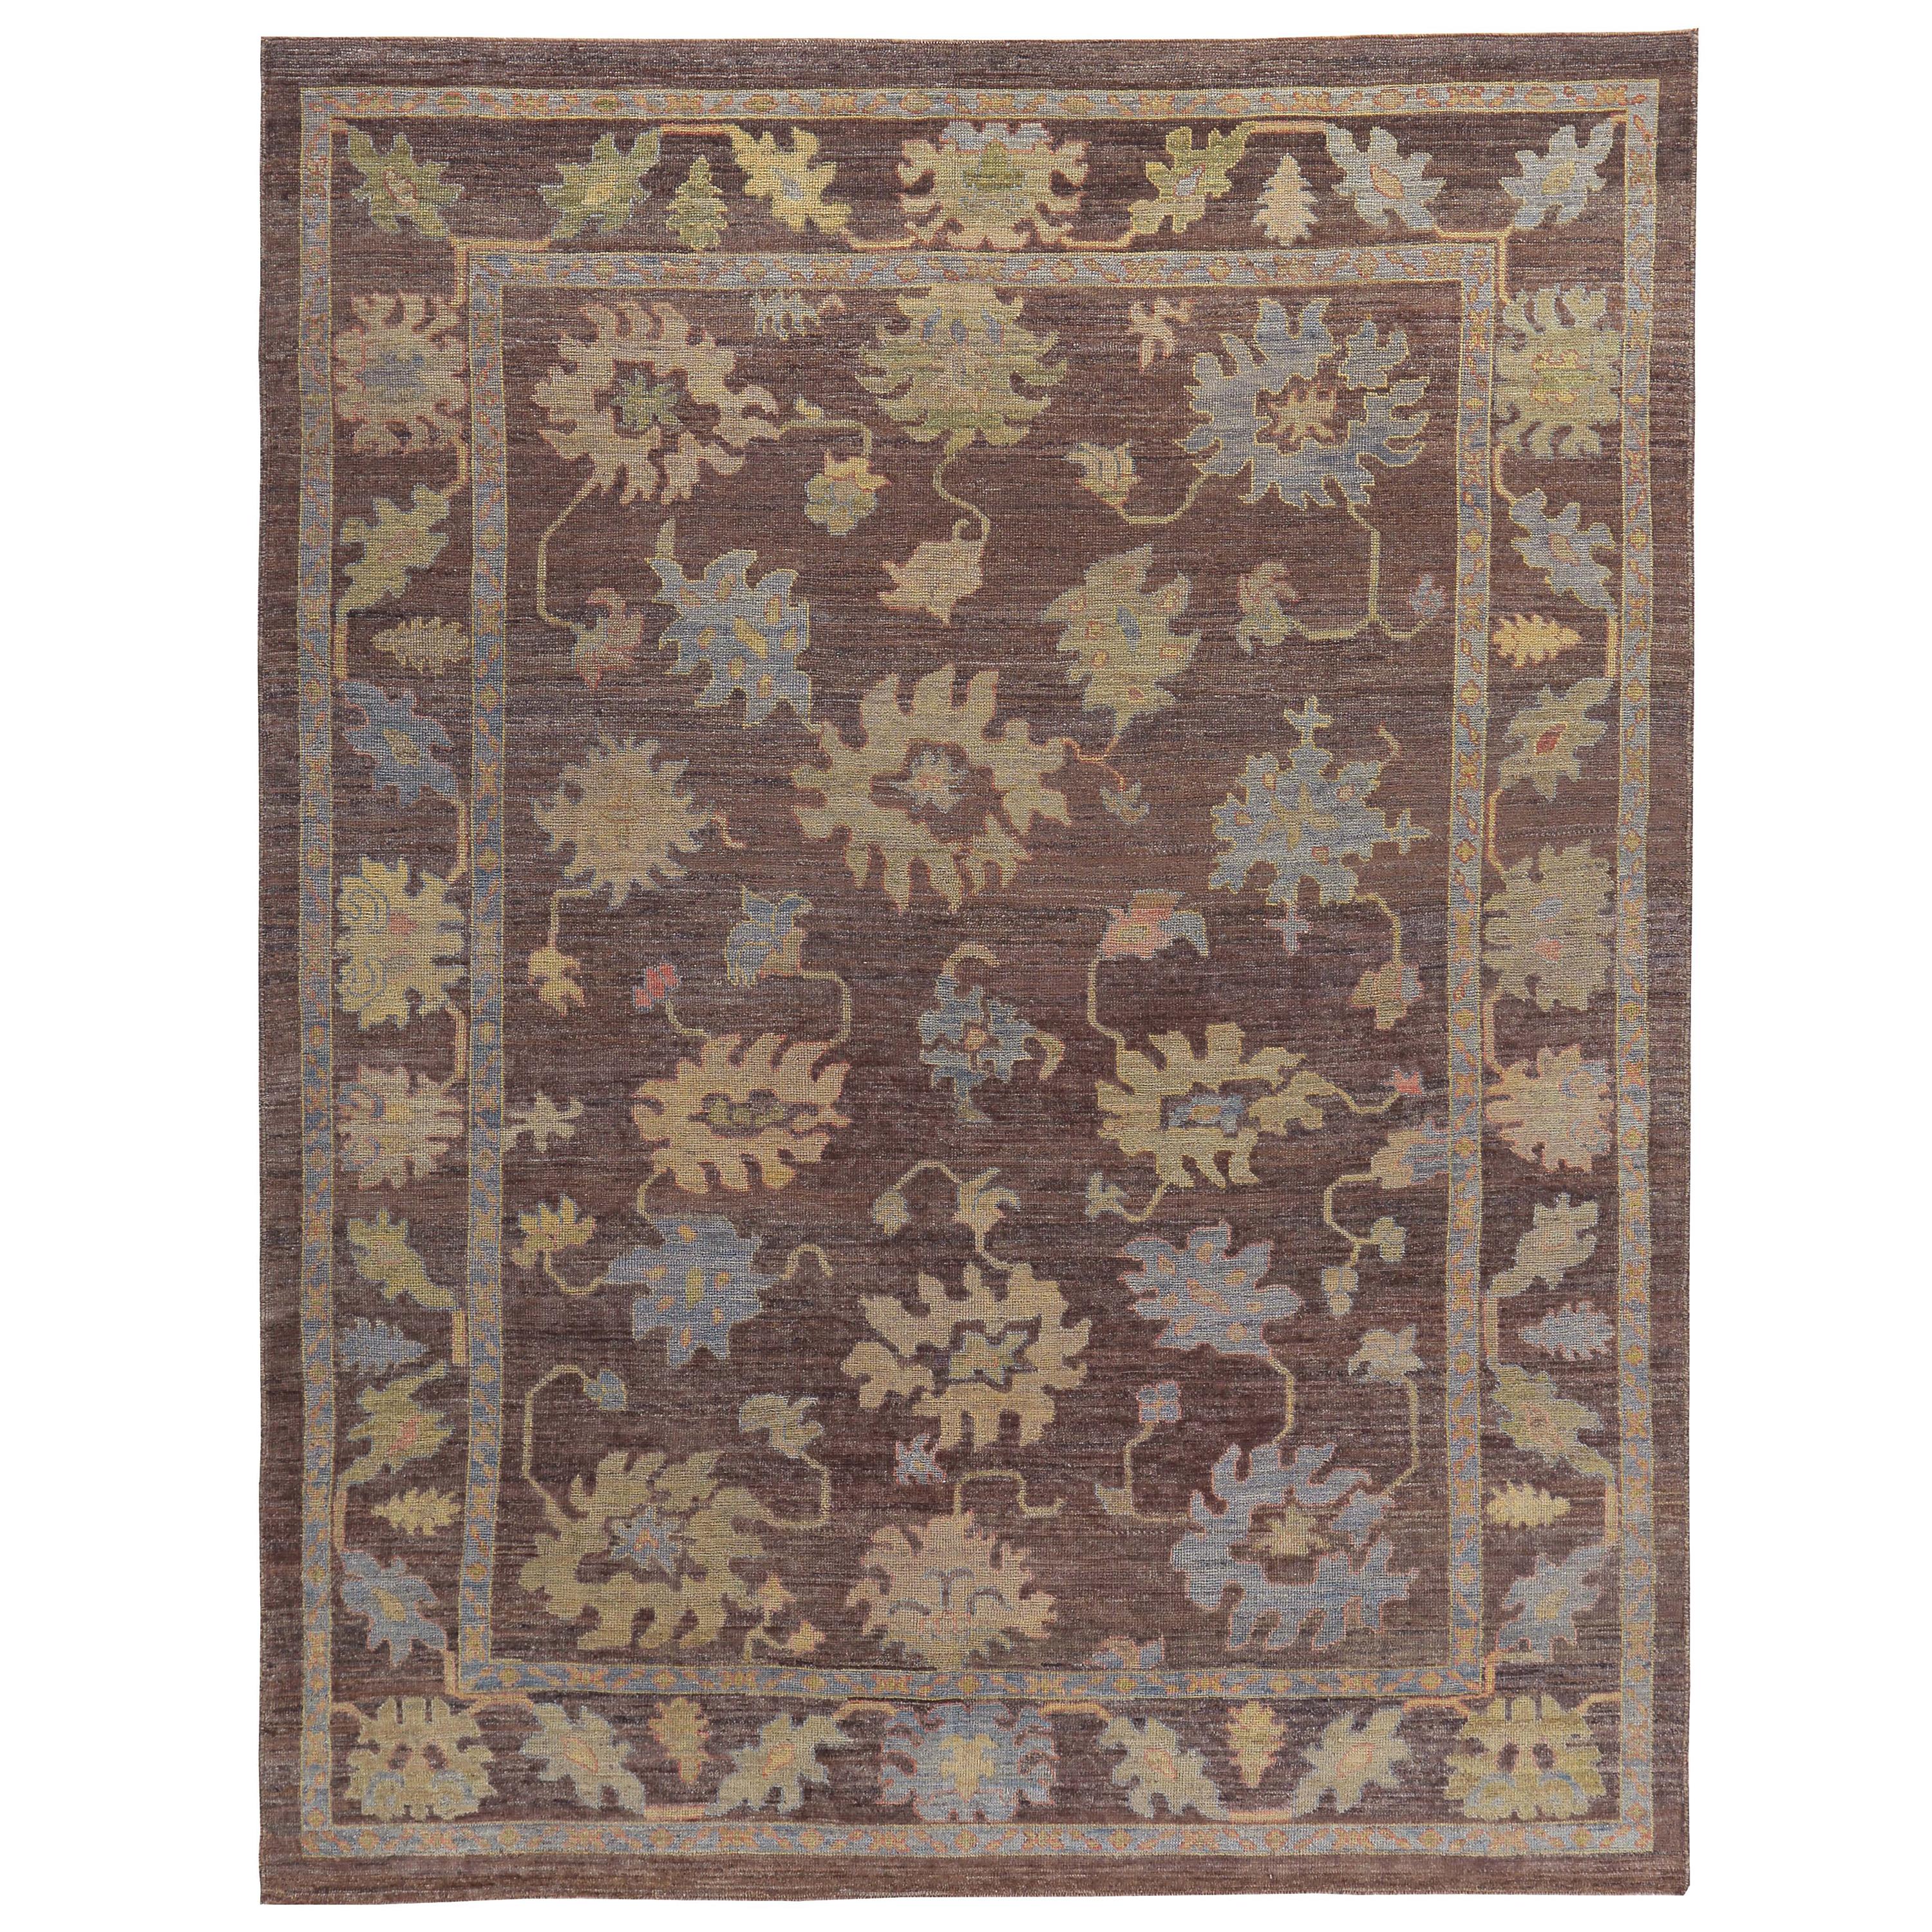 Turkish Oushak Rug with Blue, Orange and Green Flower Heads on Brown Field For Sale